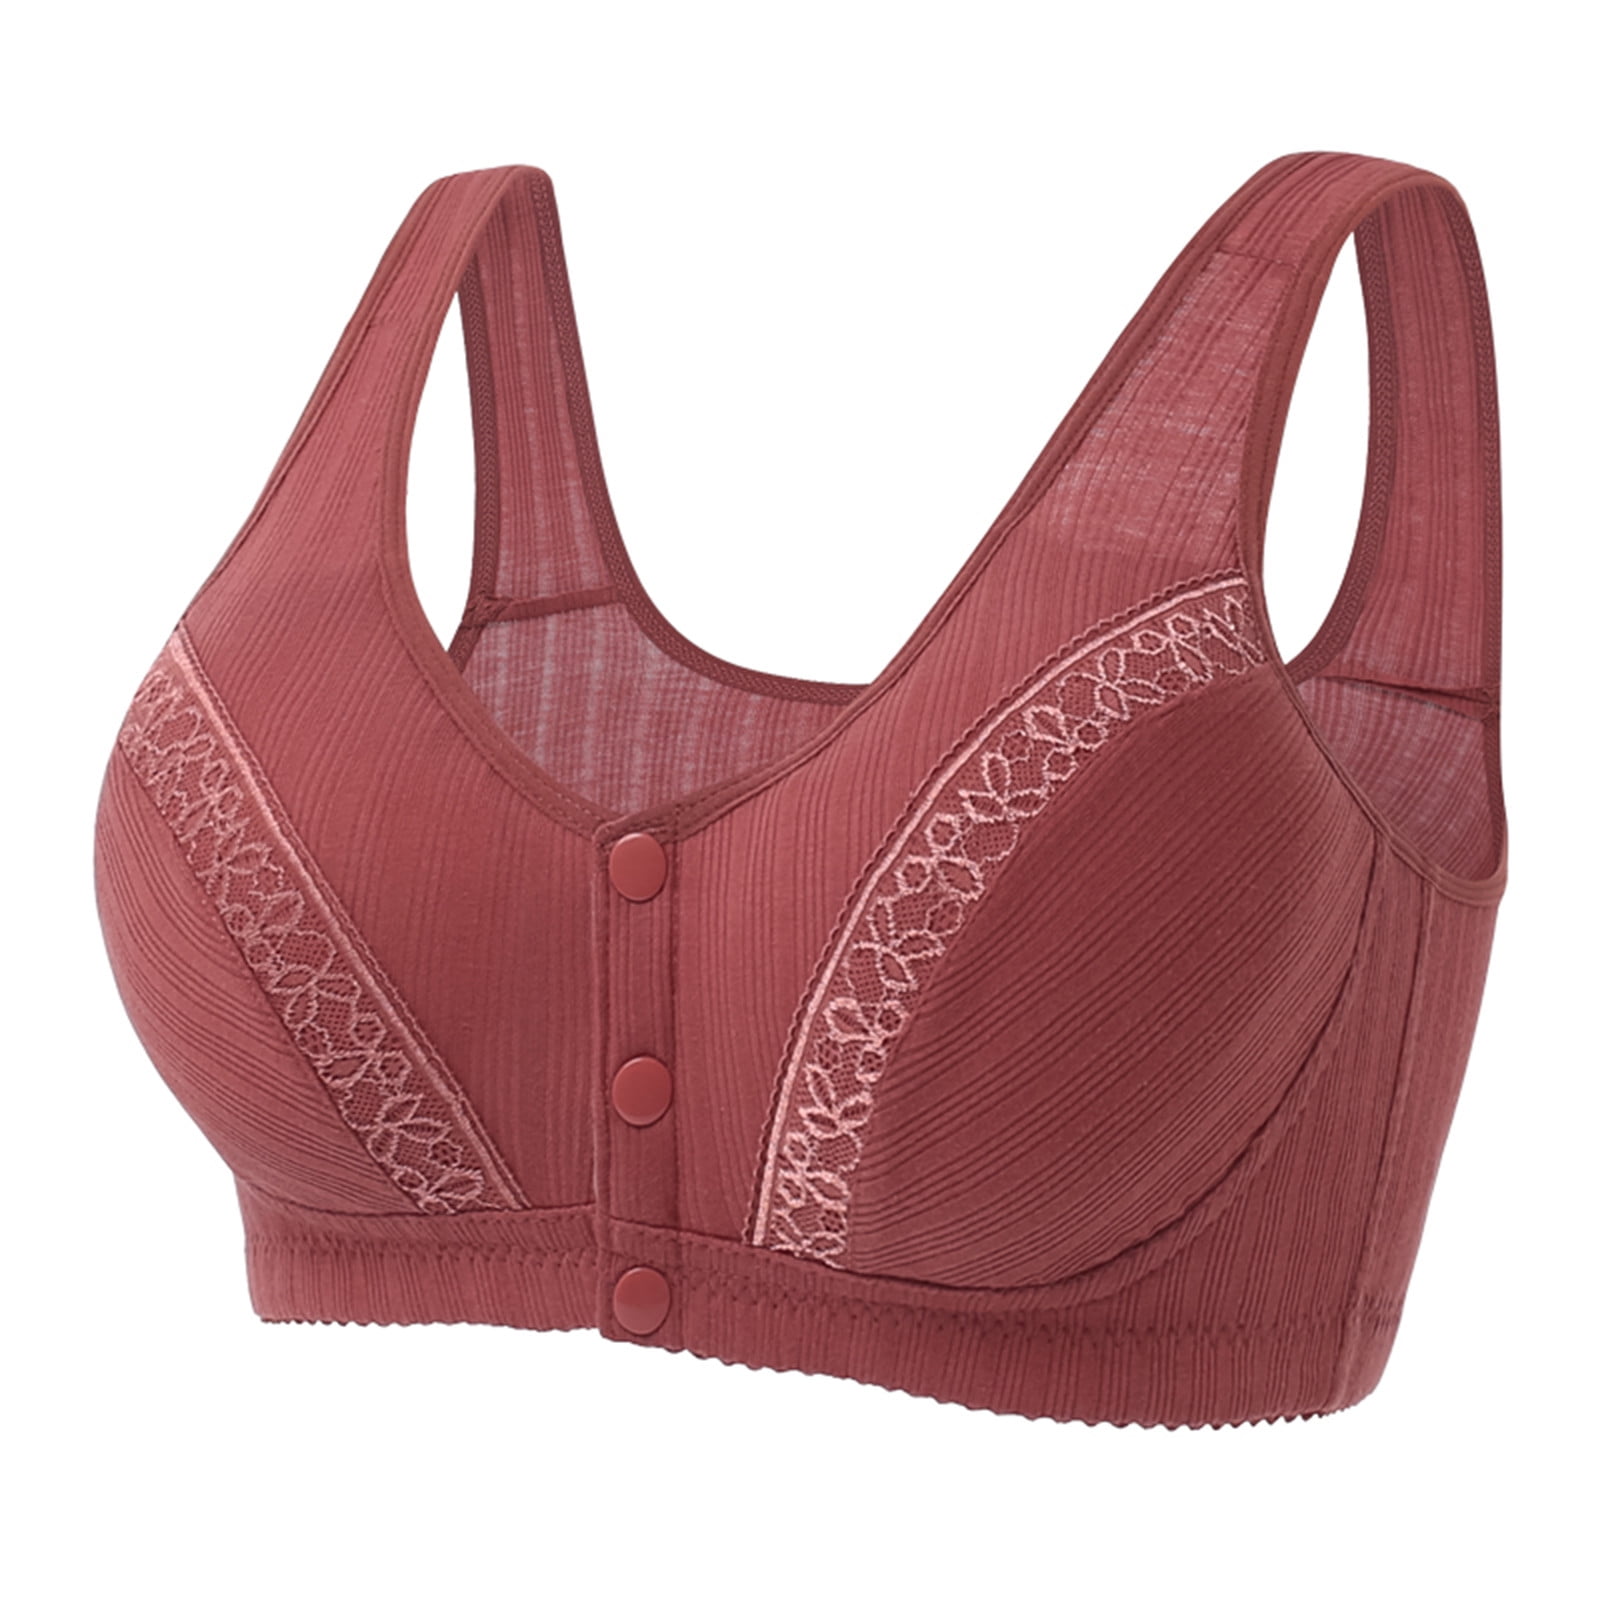 Fsqjgq Women Seamless Bras Solid Seamless Breathable Sports Bra Lingerie  Plus Size Push up Shaping Cup Underwear Vest Rose Gold Xl 